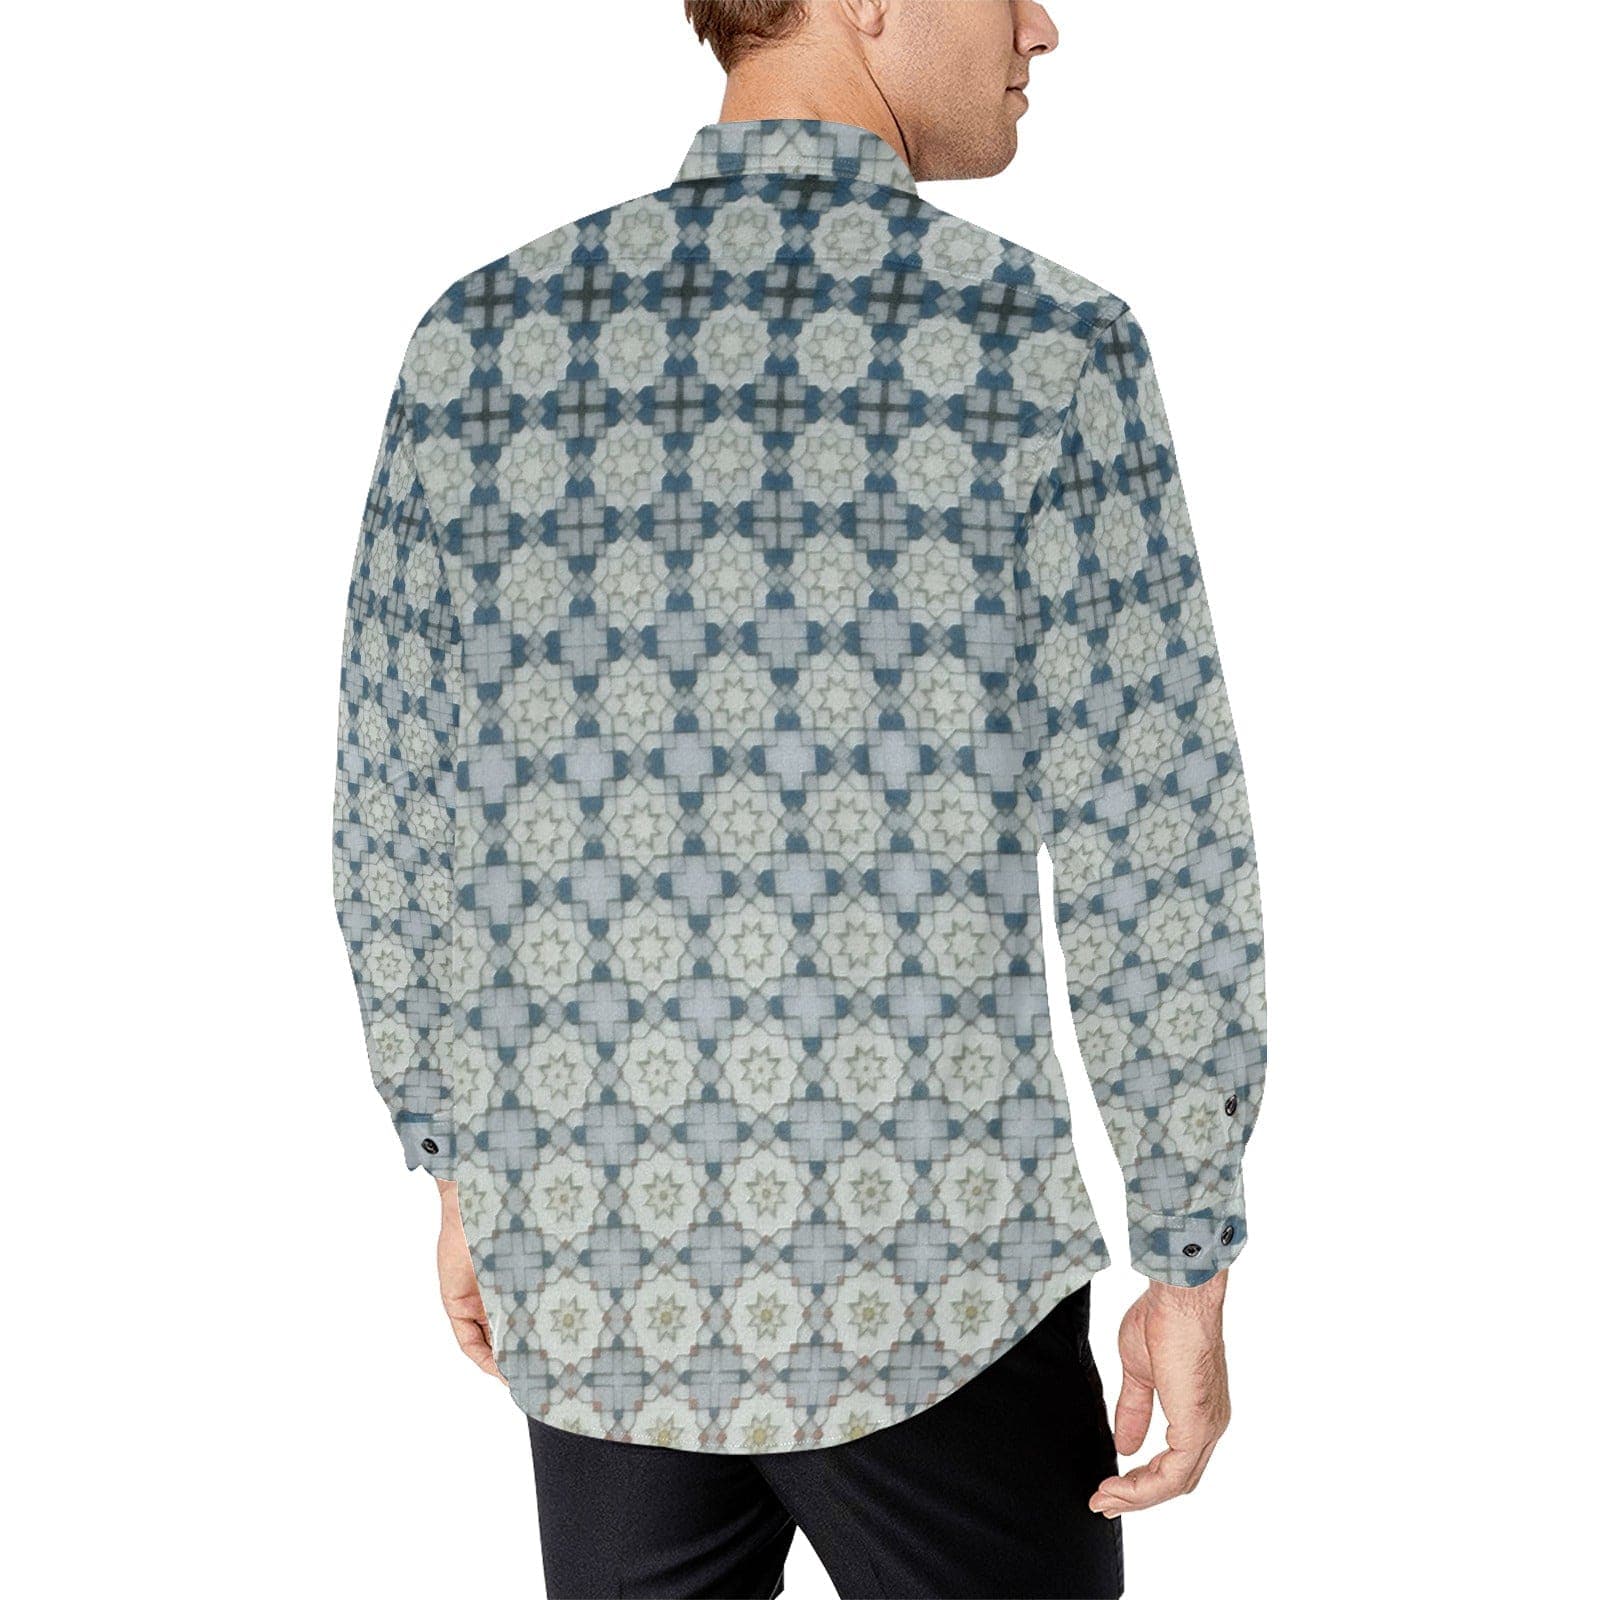 Geometrical Patterned Shirt for Men Long Sleeve Shirt (Without Pocket)